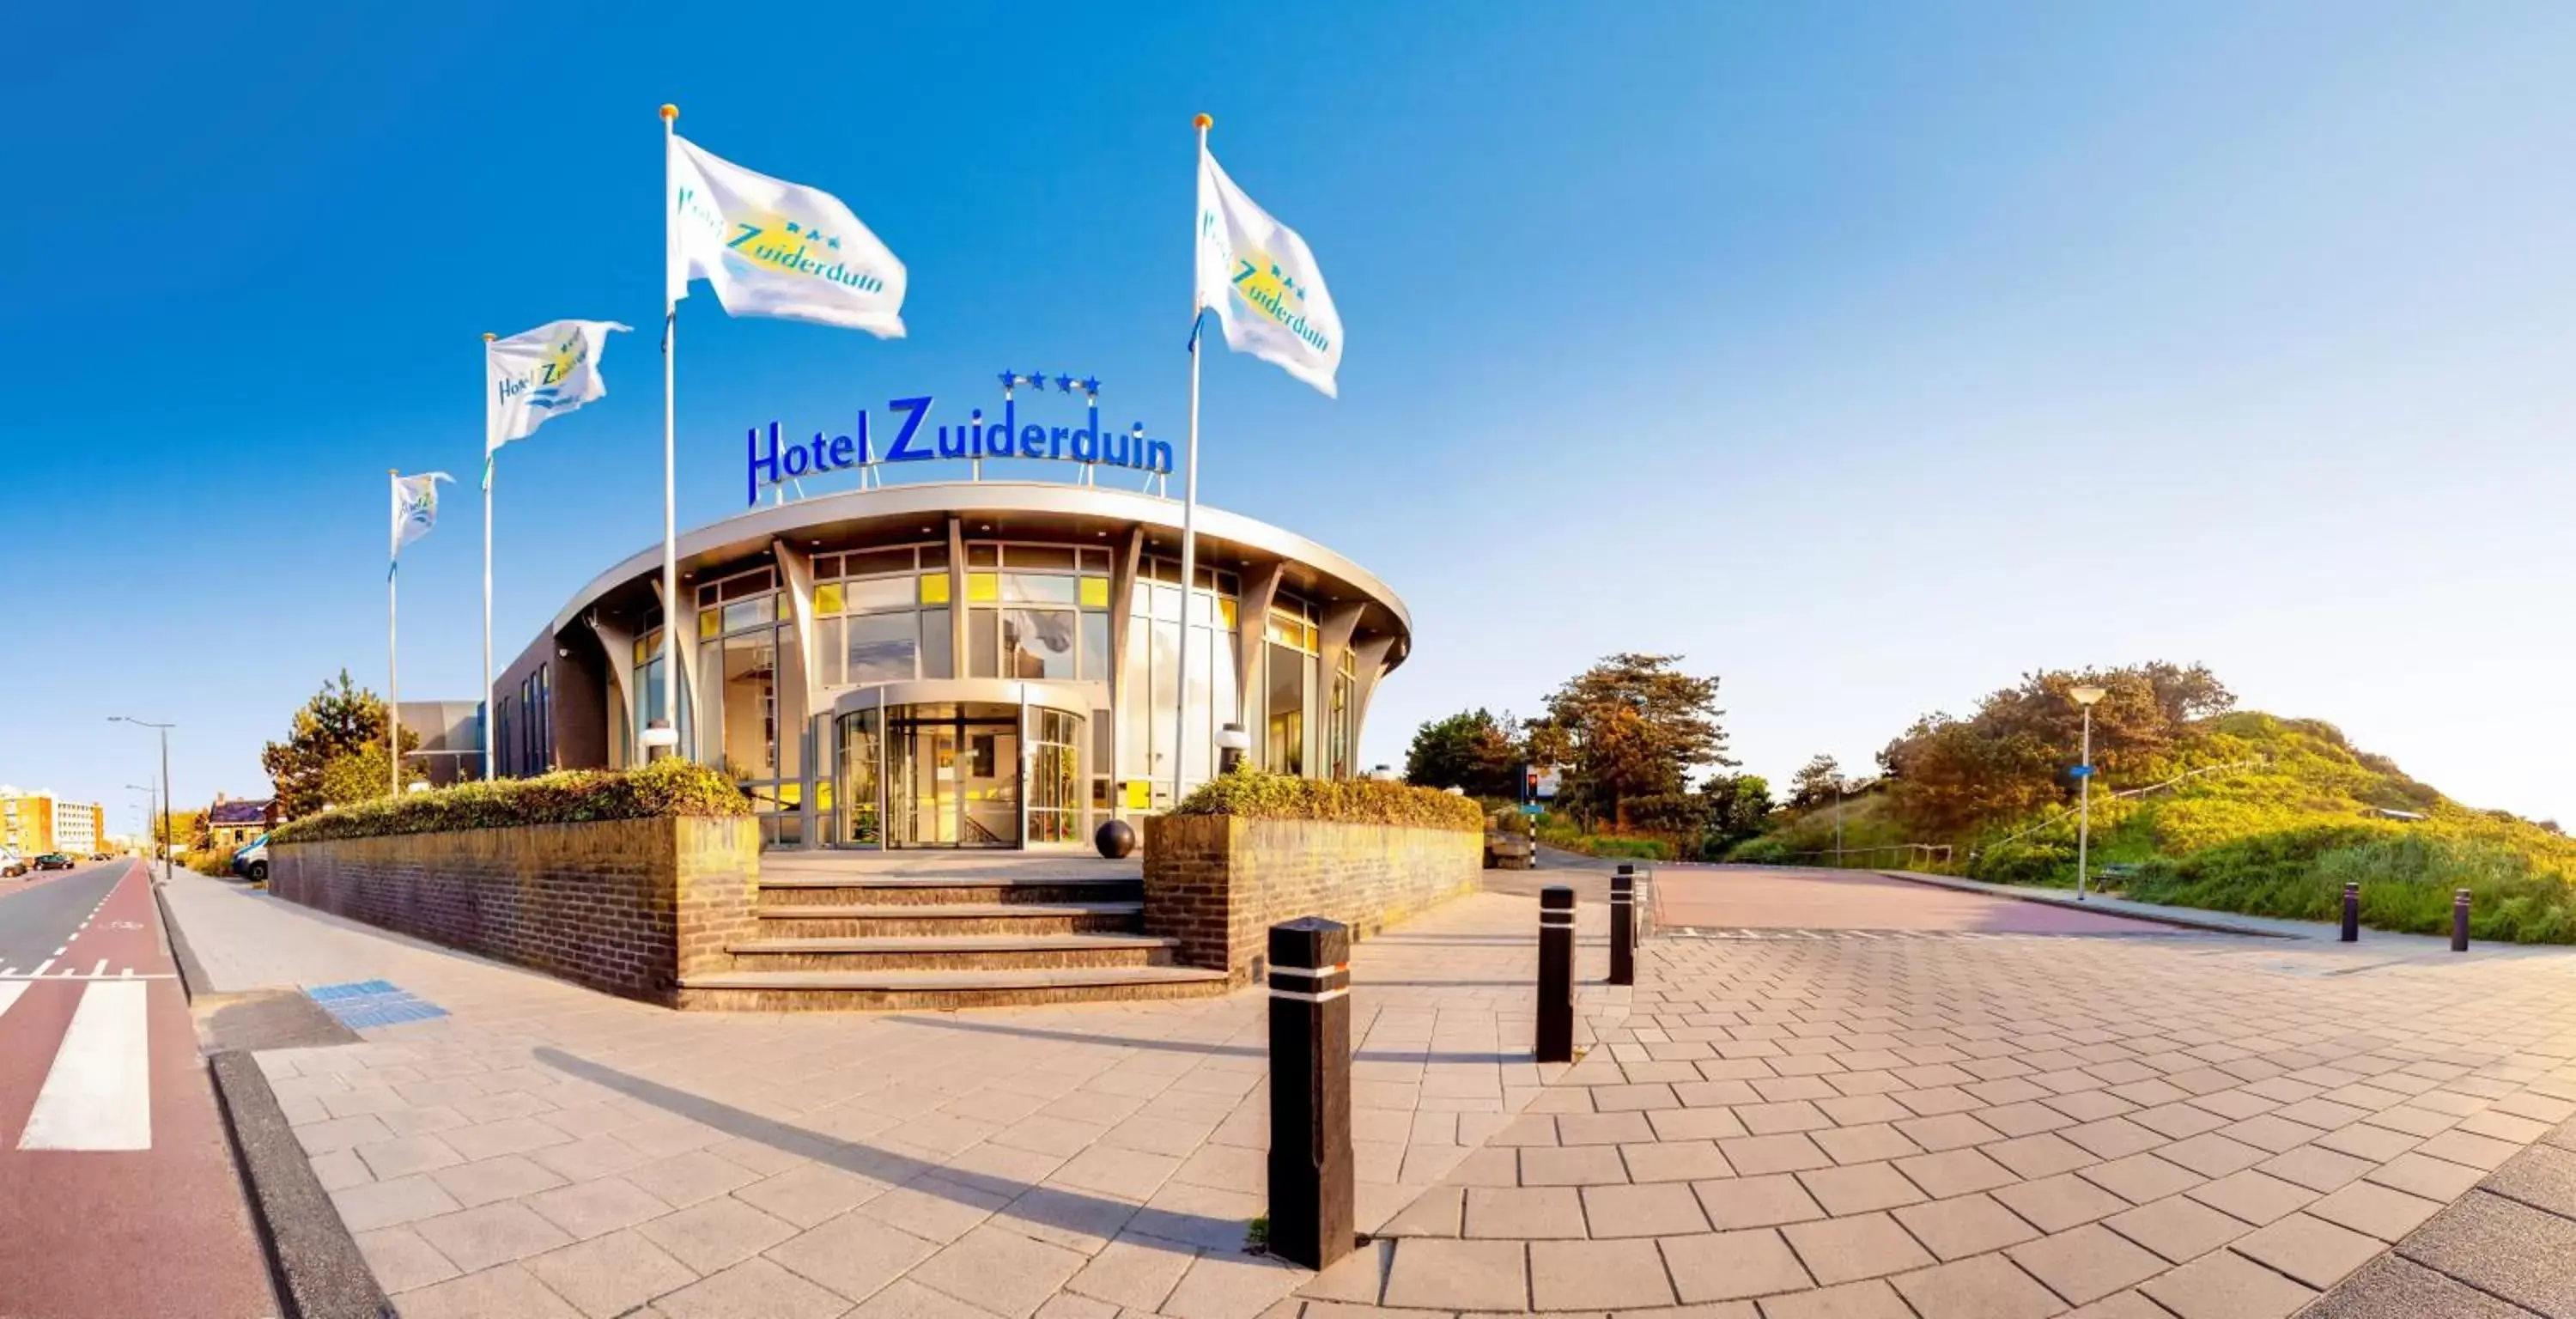 Property building in Hotel Zuiderduin